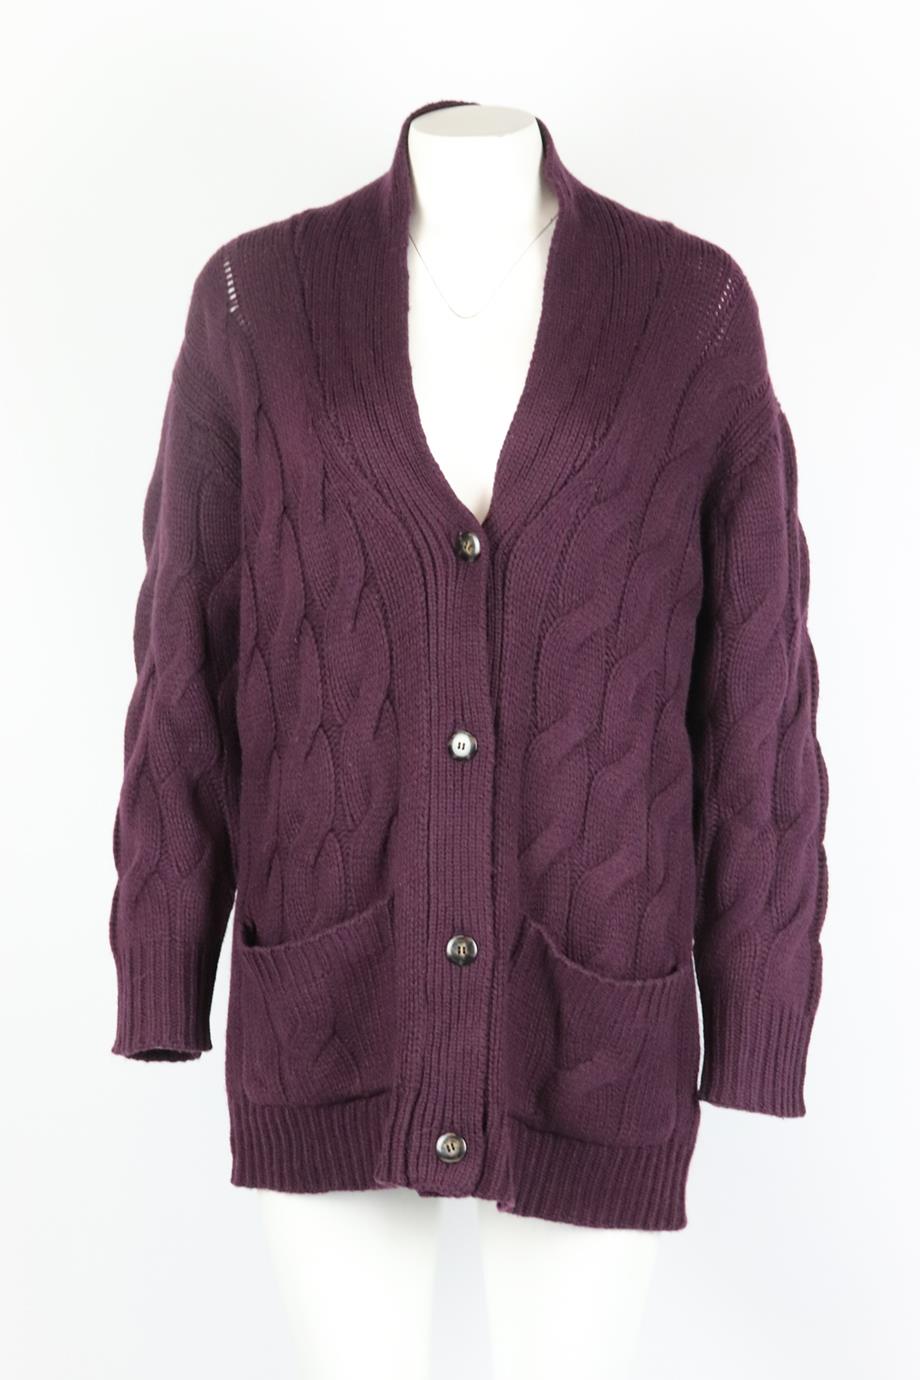 SABLYN OVERSIZED CABLE KNIT CASHMERE CARDIGAN XSMALL